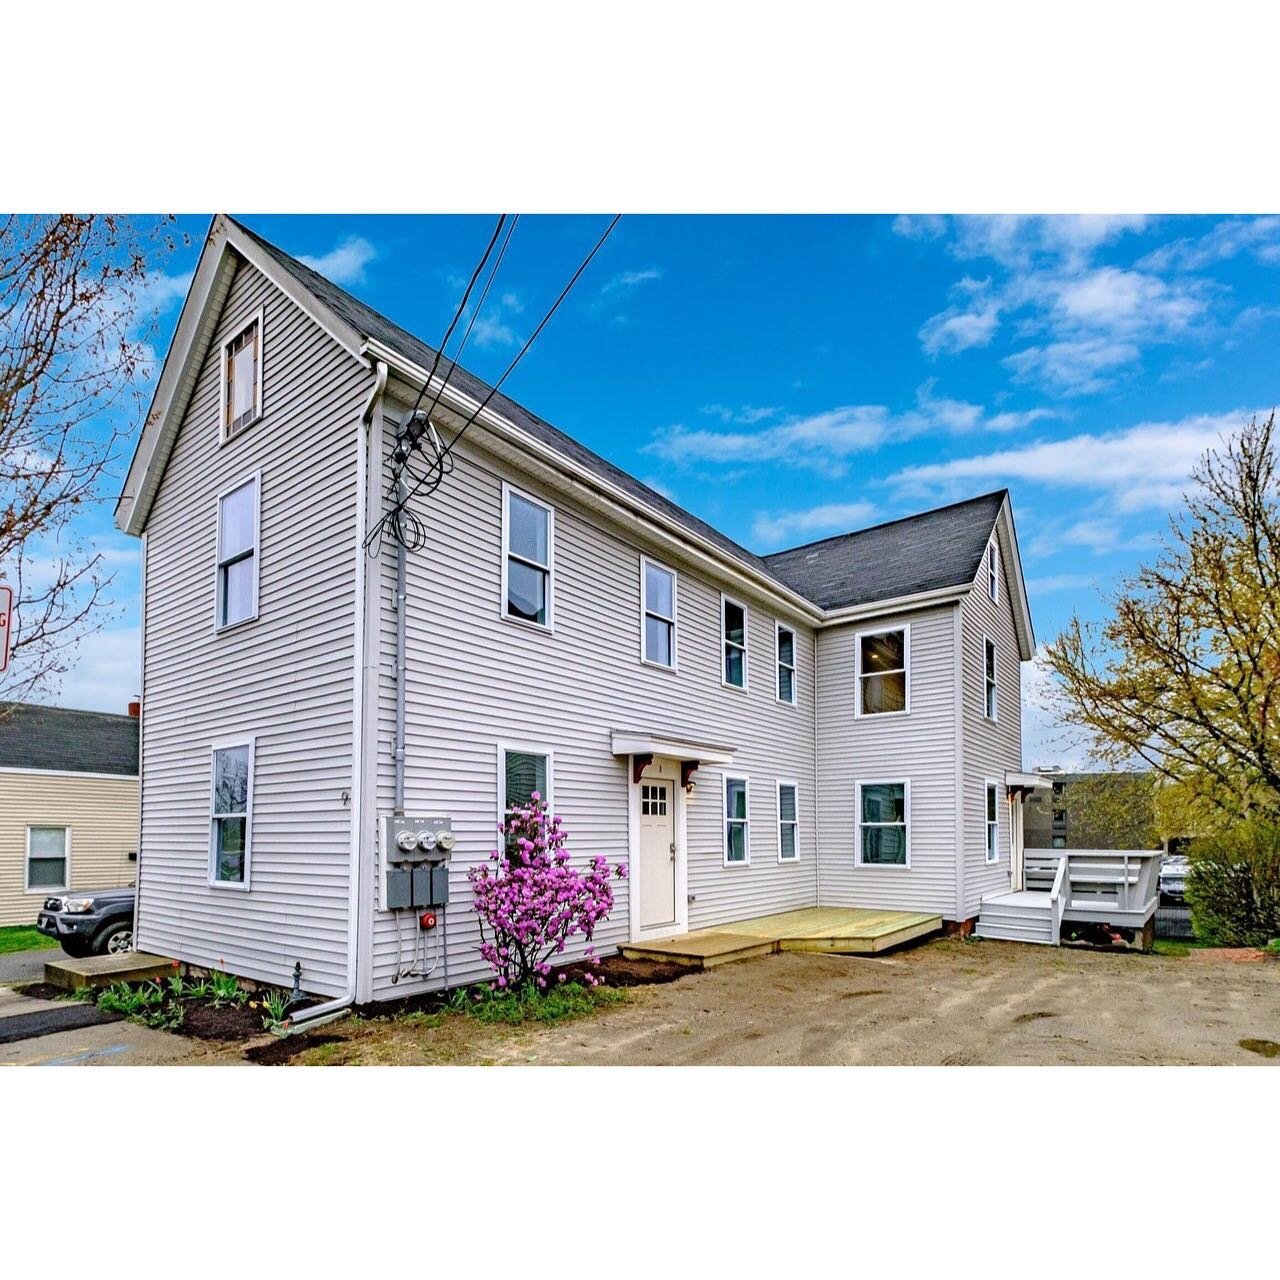 🔑AVAILABLE NOW

Everything is brand new! This 2 bedroom, 1 3/4 bathroom apartment in Libbytown was recently renovated and is ready for immediate occupancy. 

If you work at Maine Medical Center, this location is ideal for you. Just a 5 minute walk u